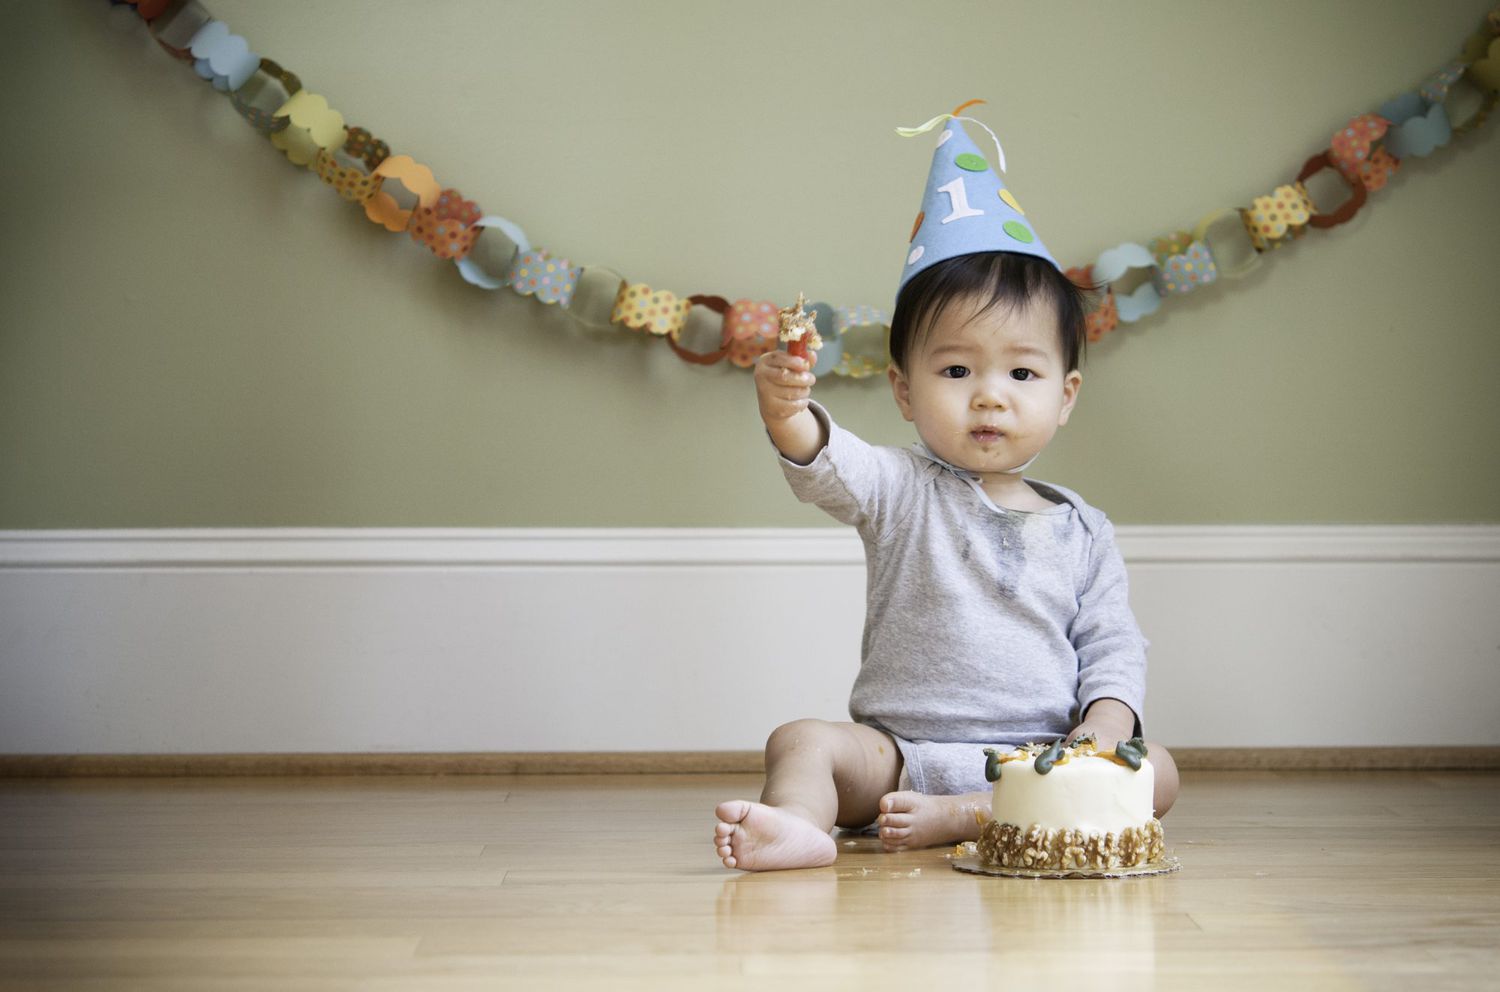 aby celebrating his First Birthday in front of his birthday cake at his birthday cake smash photoshoot. He's holding out the birthday candle to the camera.